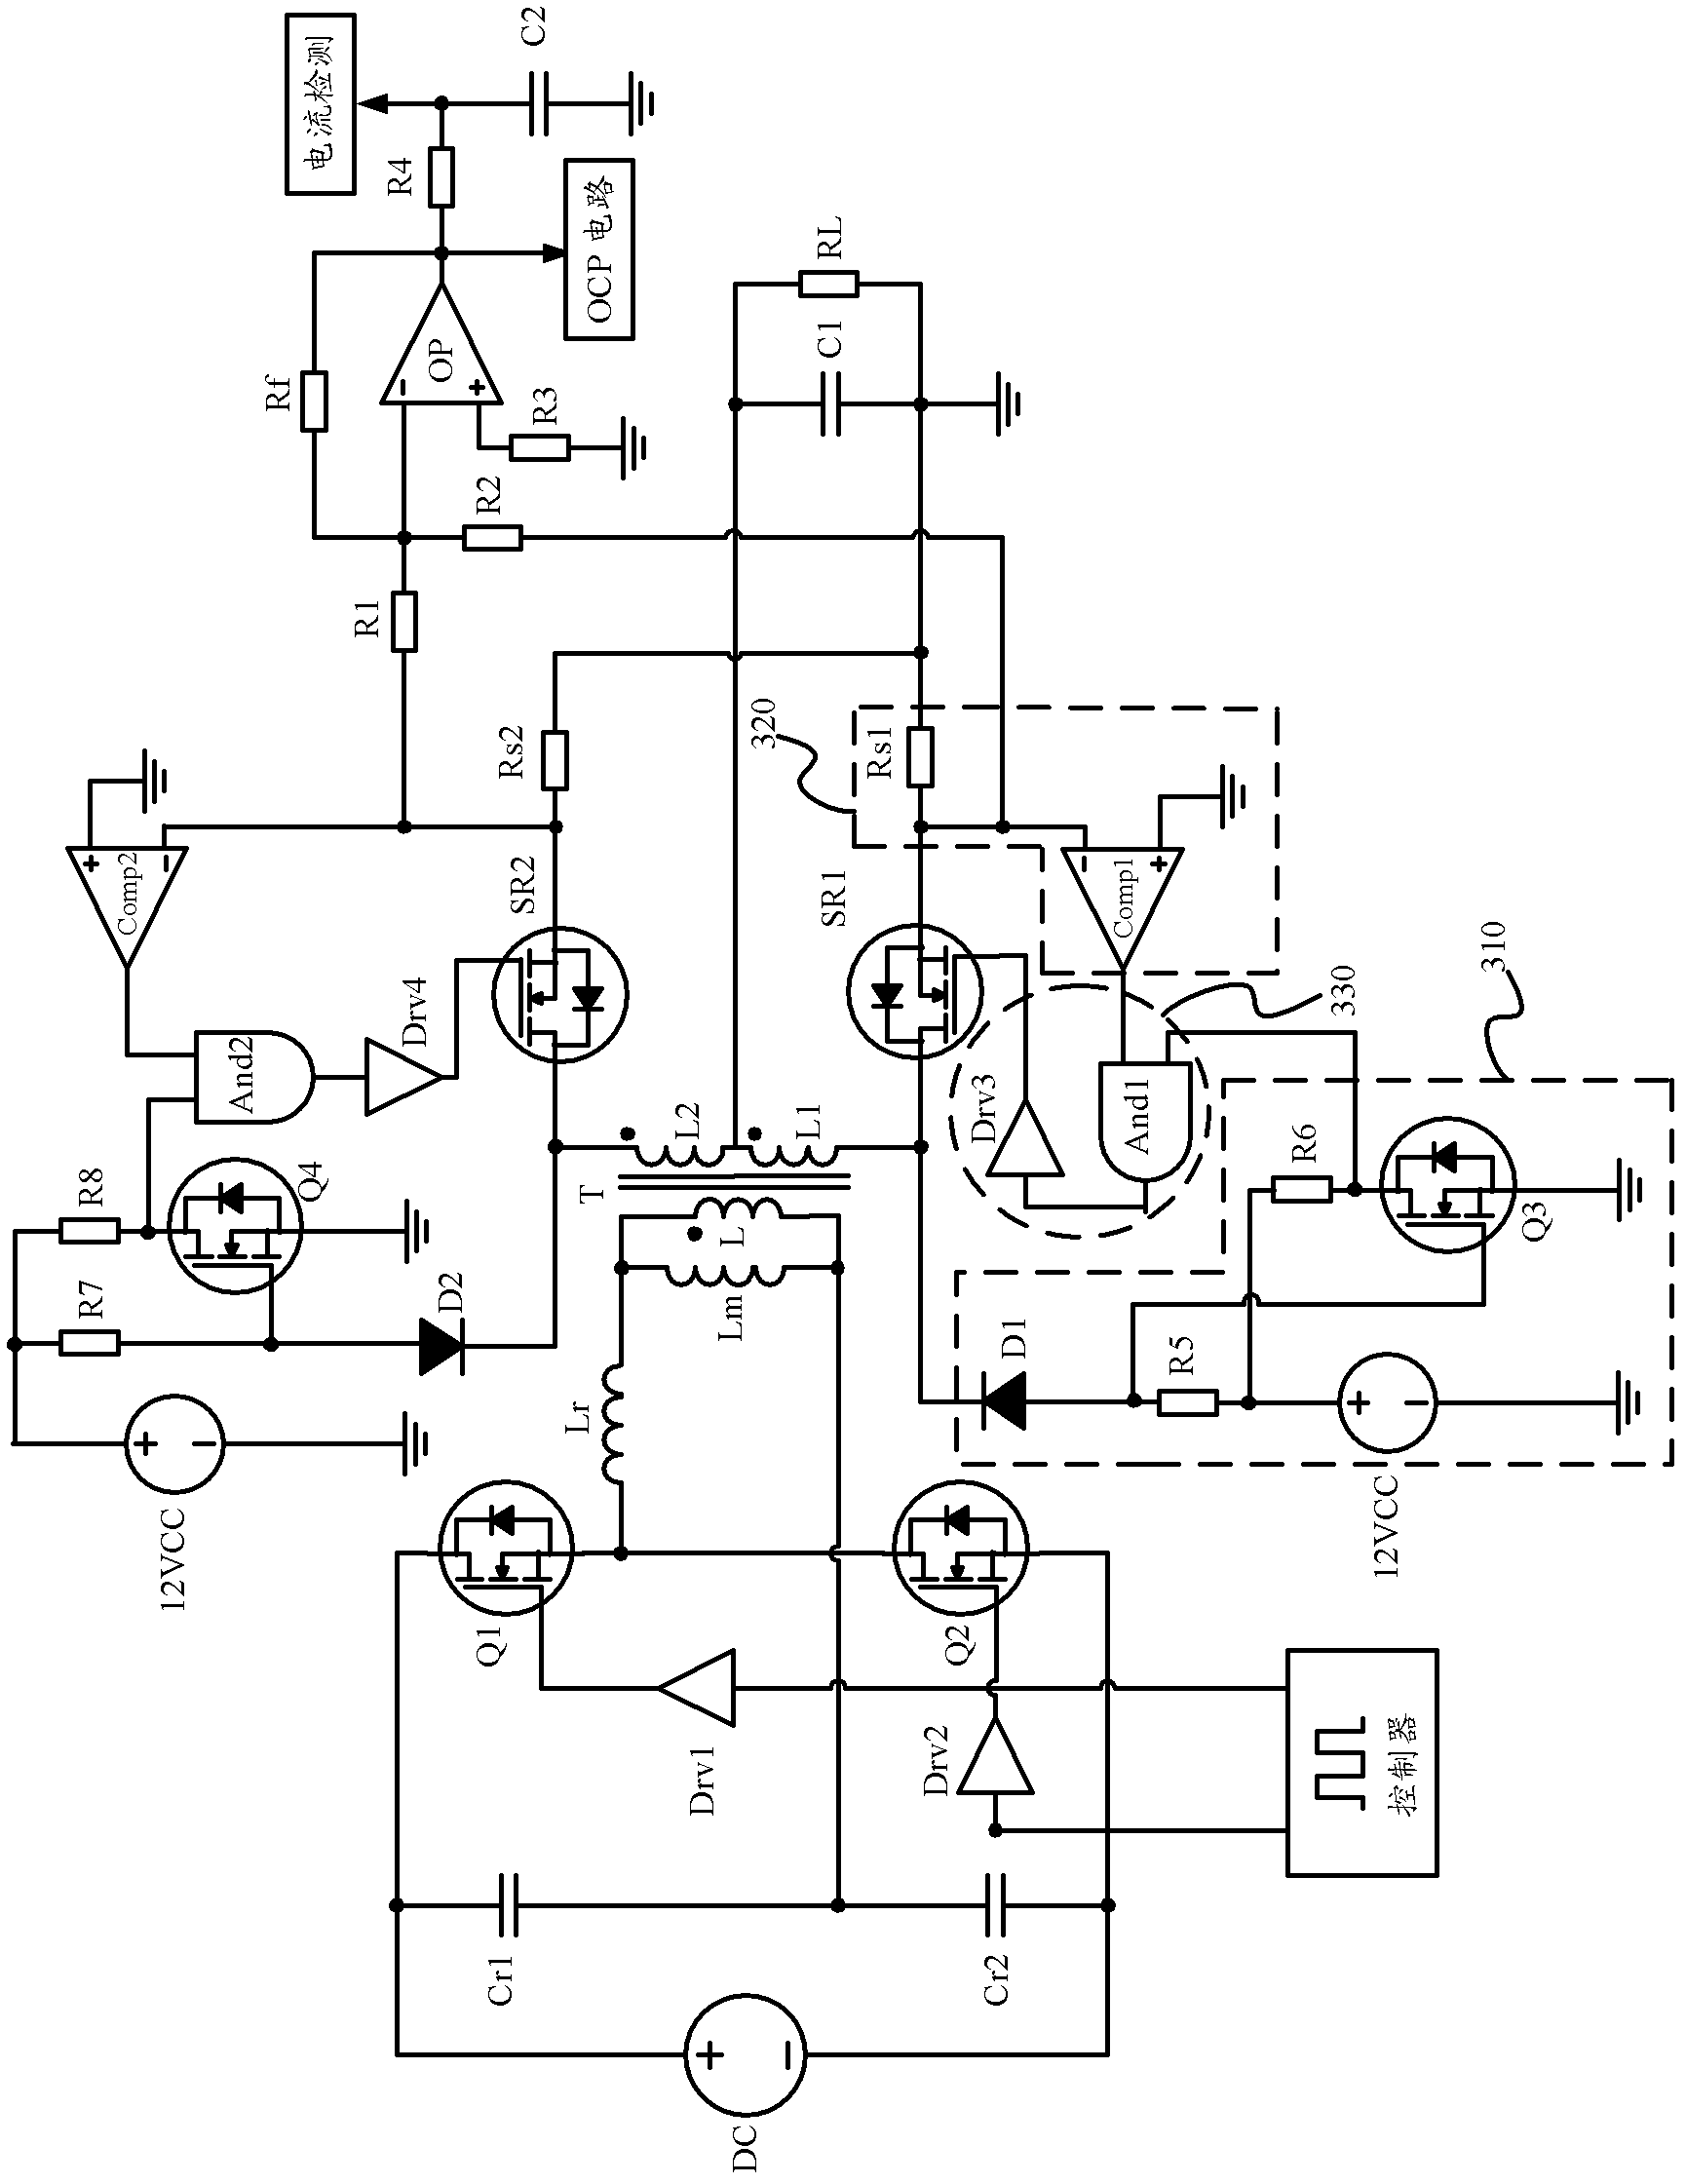 Control circuit, method and converter for synchronous rectification